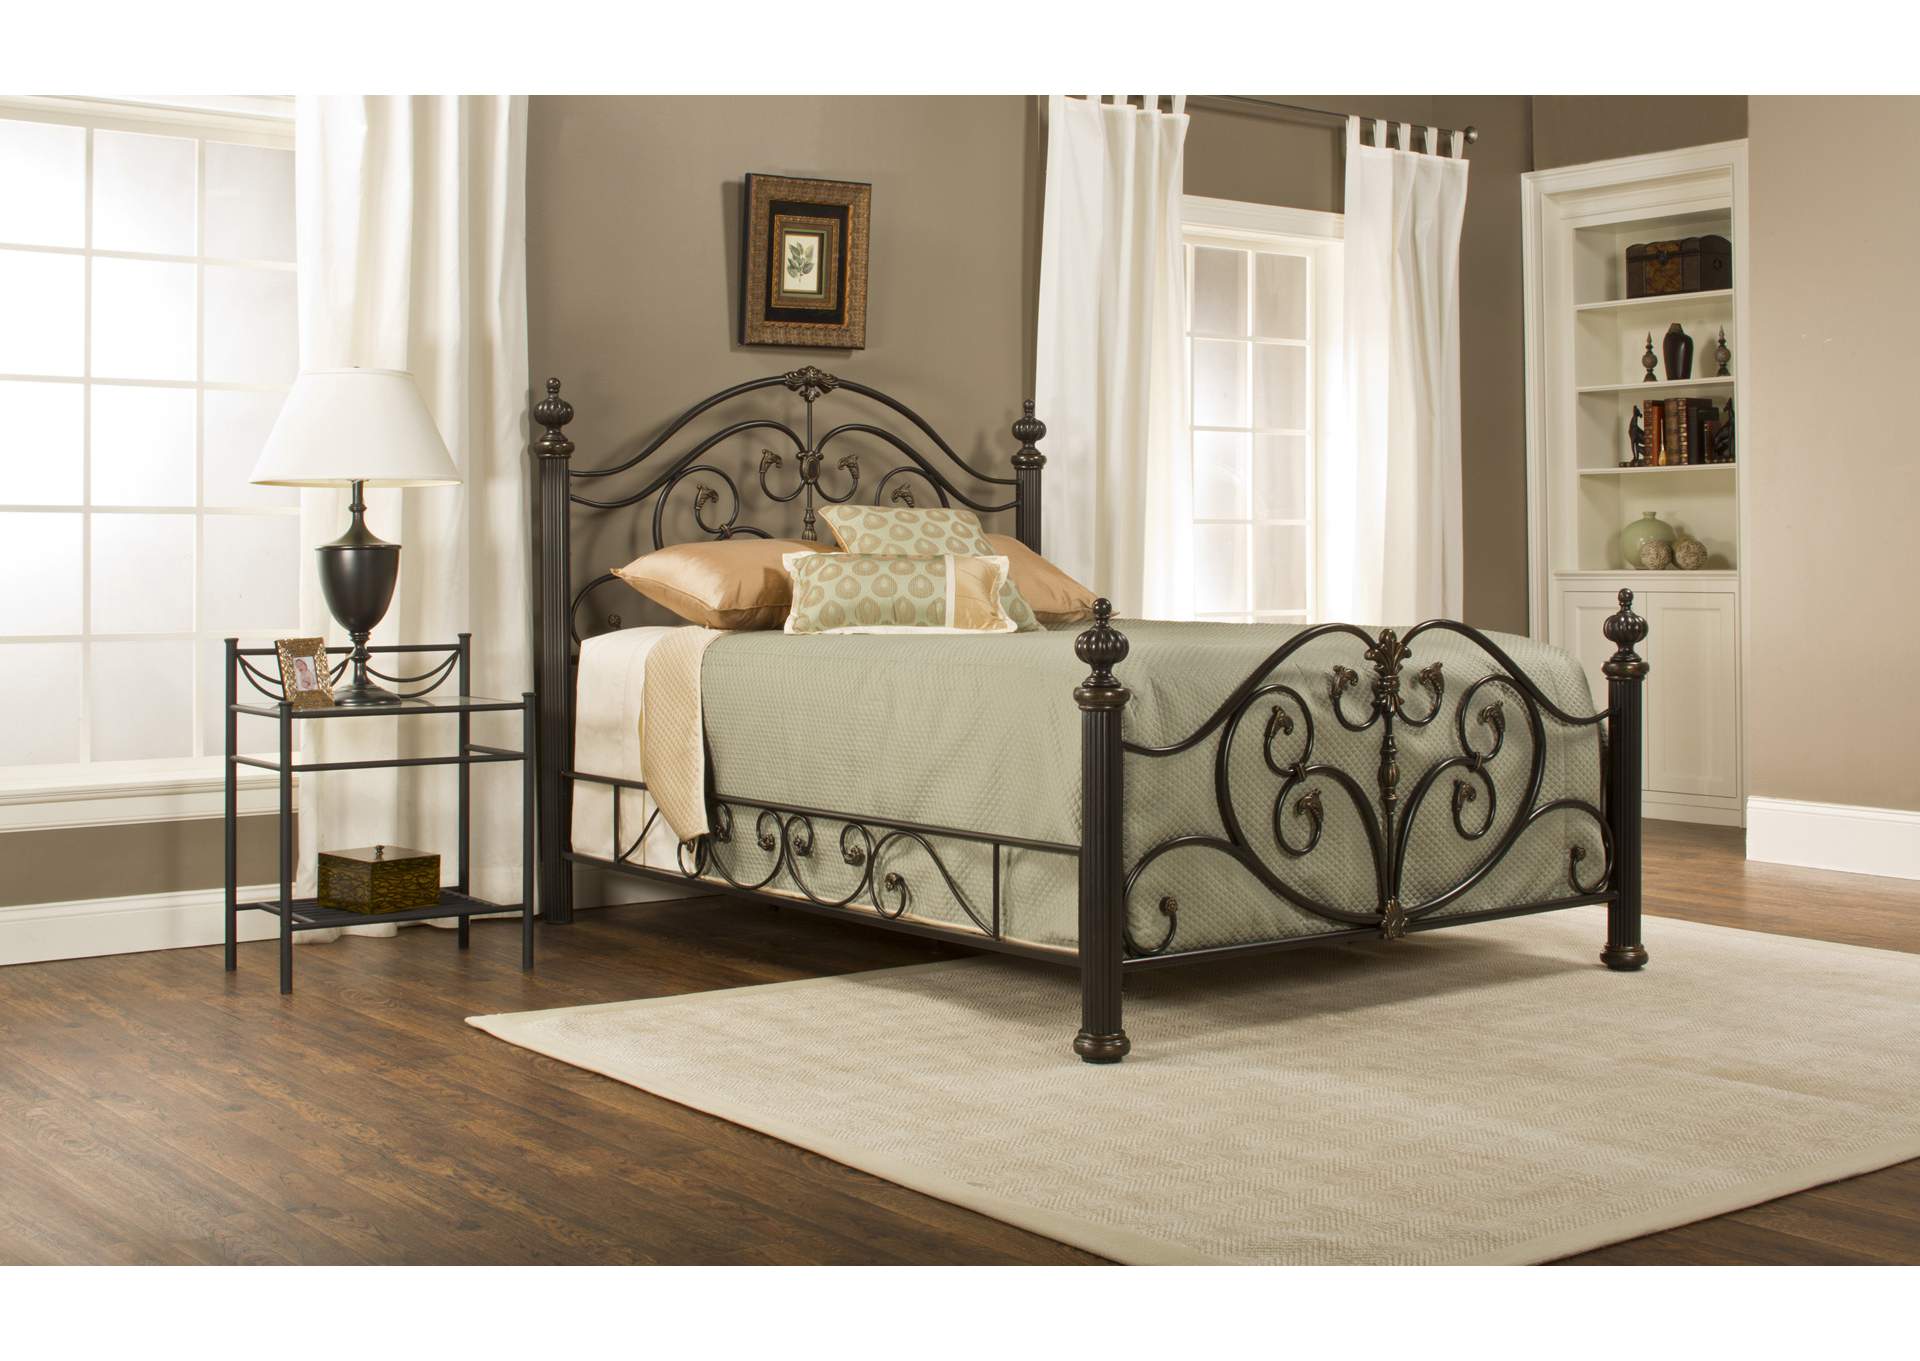 Grand Isle Queen Bed,Hillsdale